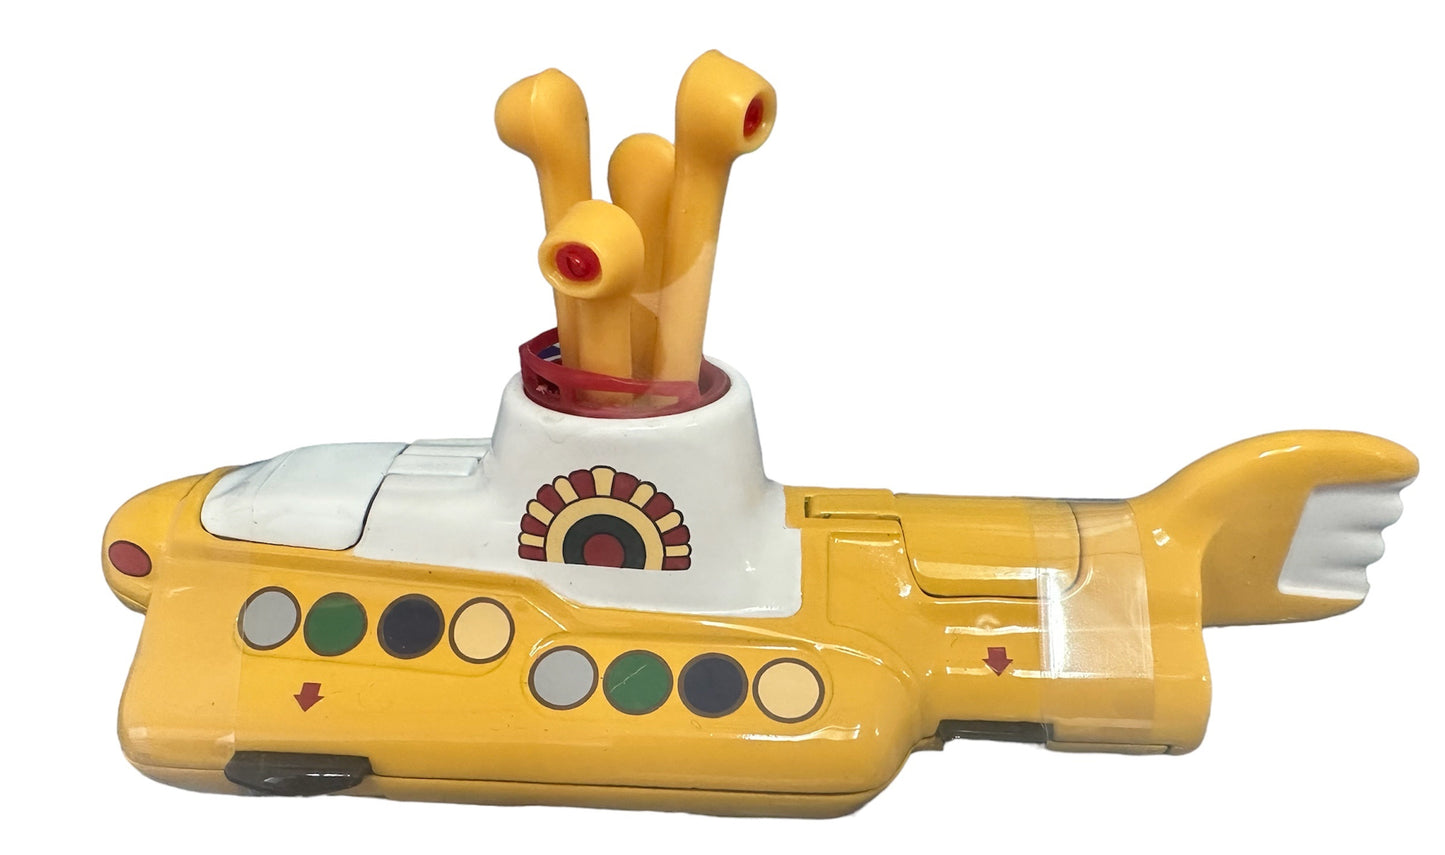 Vintage 2008 Corgi Classics The Beatles Yellow Submarine A Detailed Die-cast Replica Model For The Adult Collector - Brand New Factory Sealed Shop Stock Room Find.